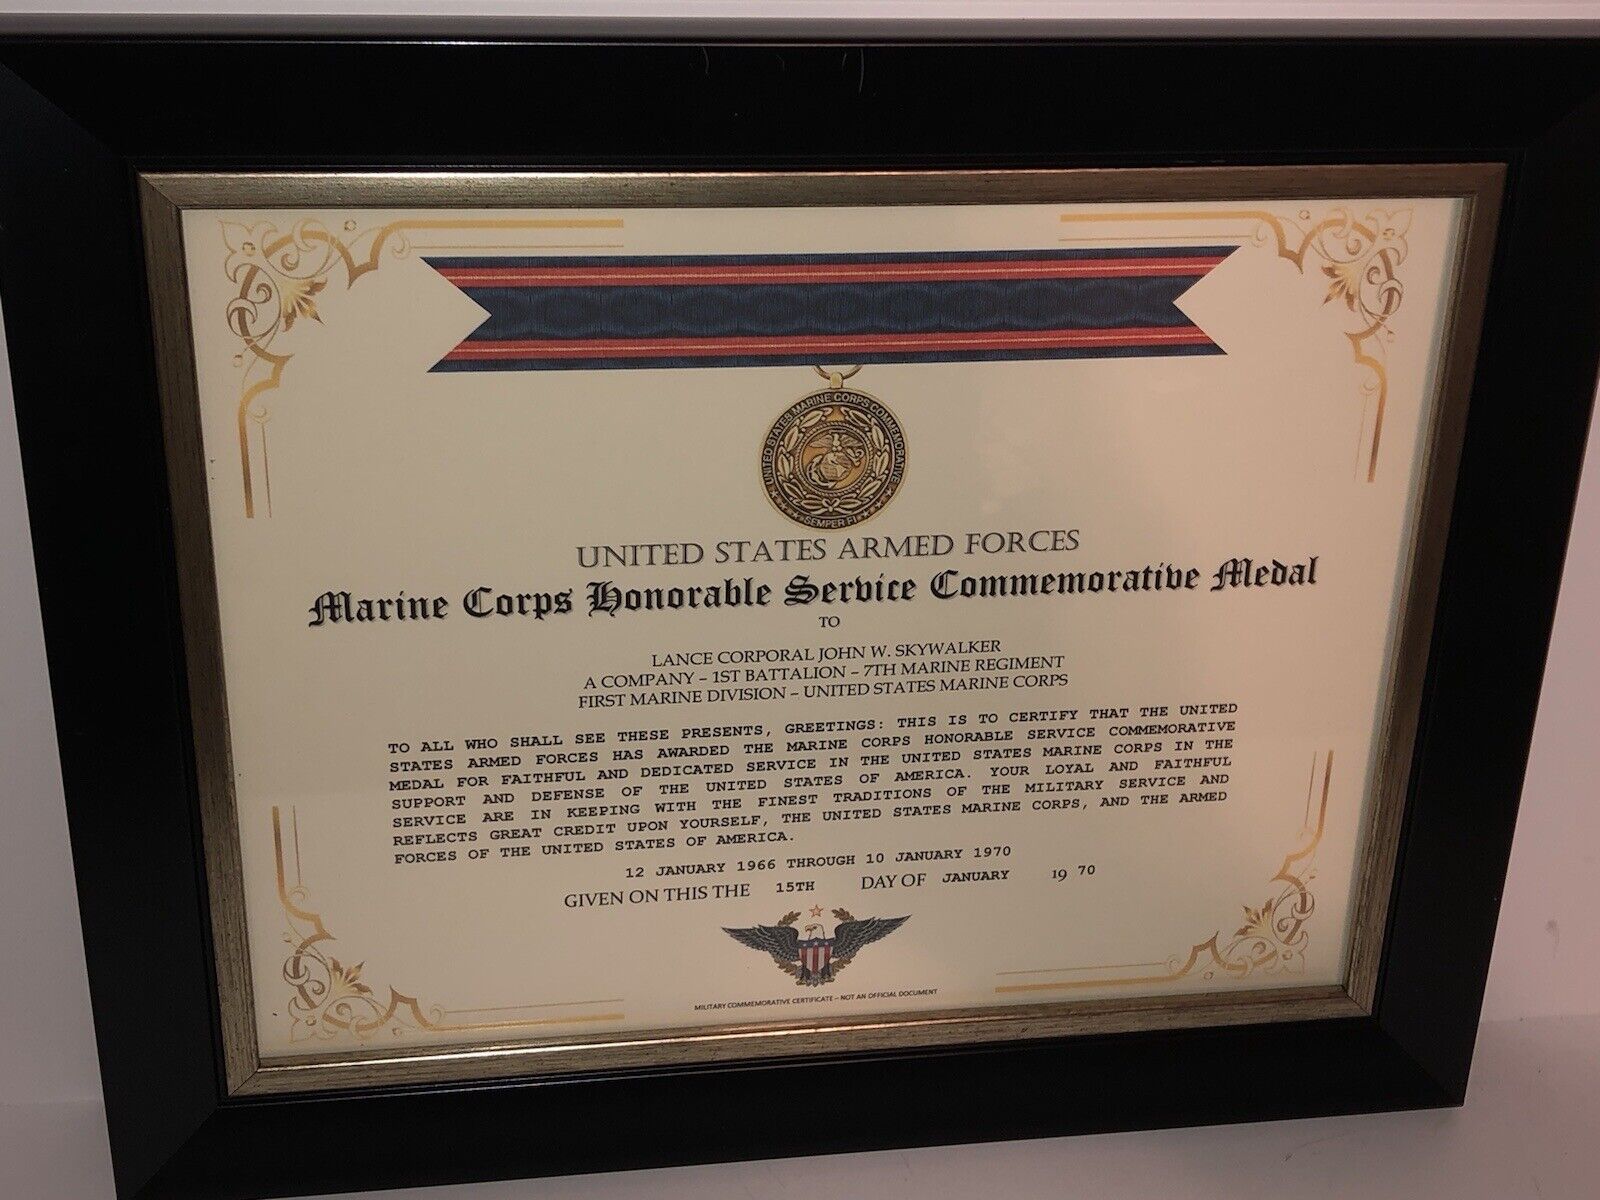 U.S. MARINE CORPS HONORABLE SERVICE COMMEMORATIVE MEDAL CERTIFICATE ~ Type 1